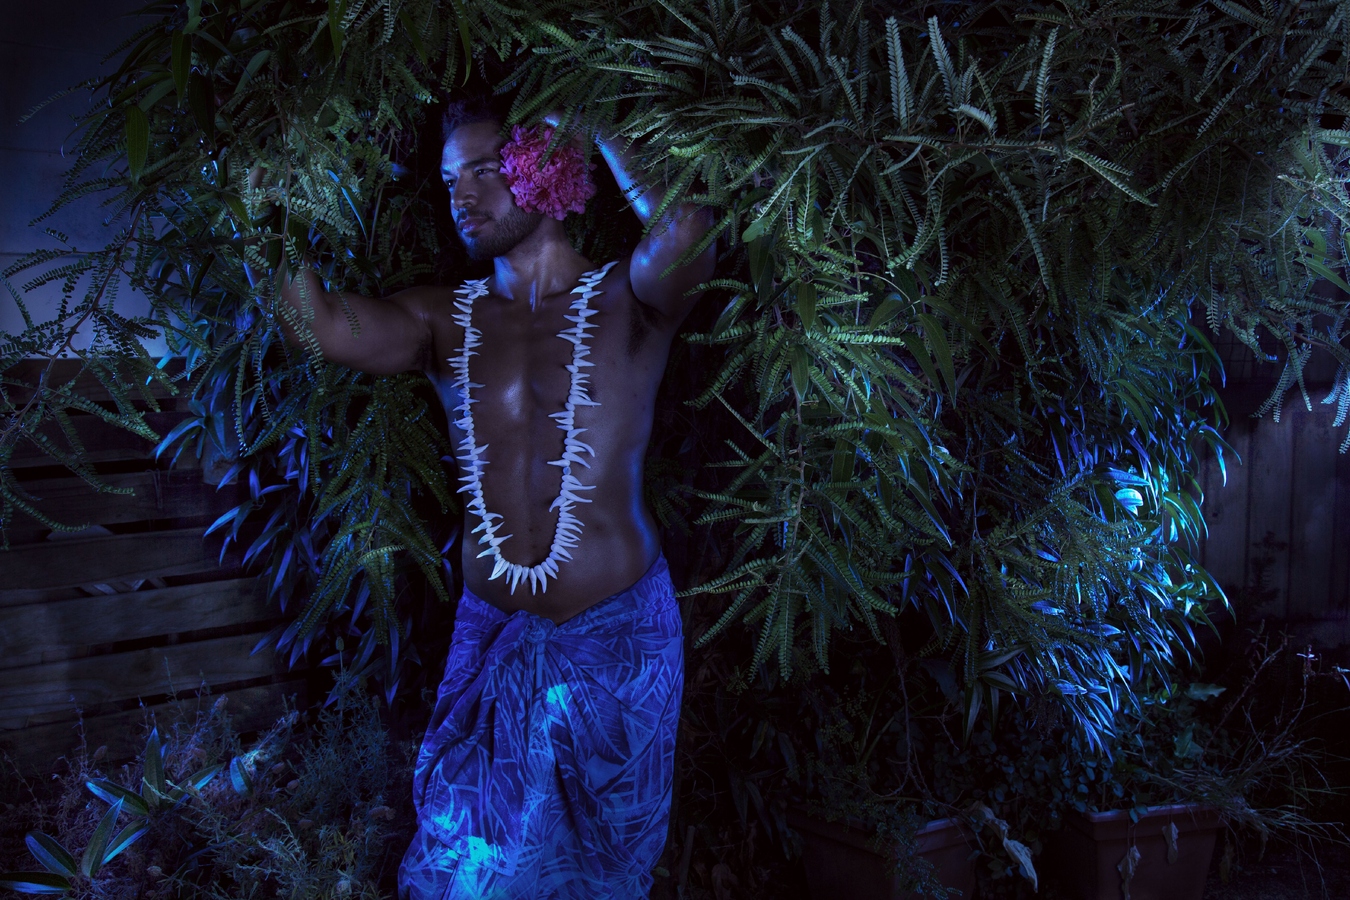 Image: Tanu Gago, SAVAGE IN THE GARDEN, 2019, with lighting assistance from Pati Solomona Tyrell, makeup & styling by Elyssia Wilson Heti, and model Tapuaki Helu.